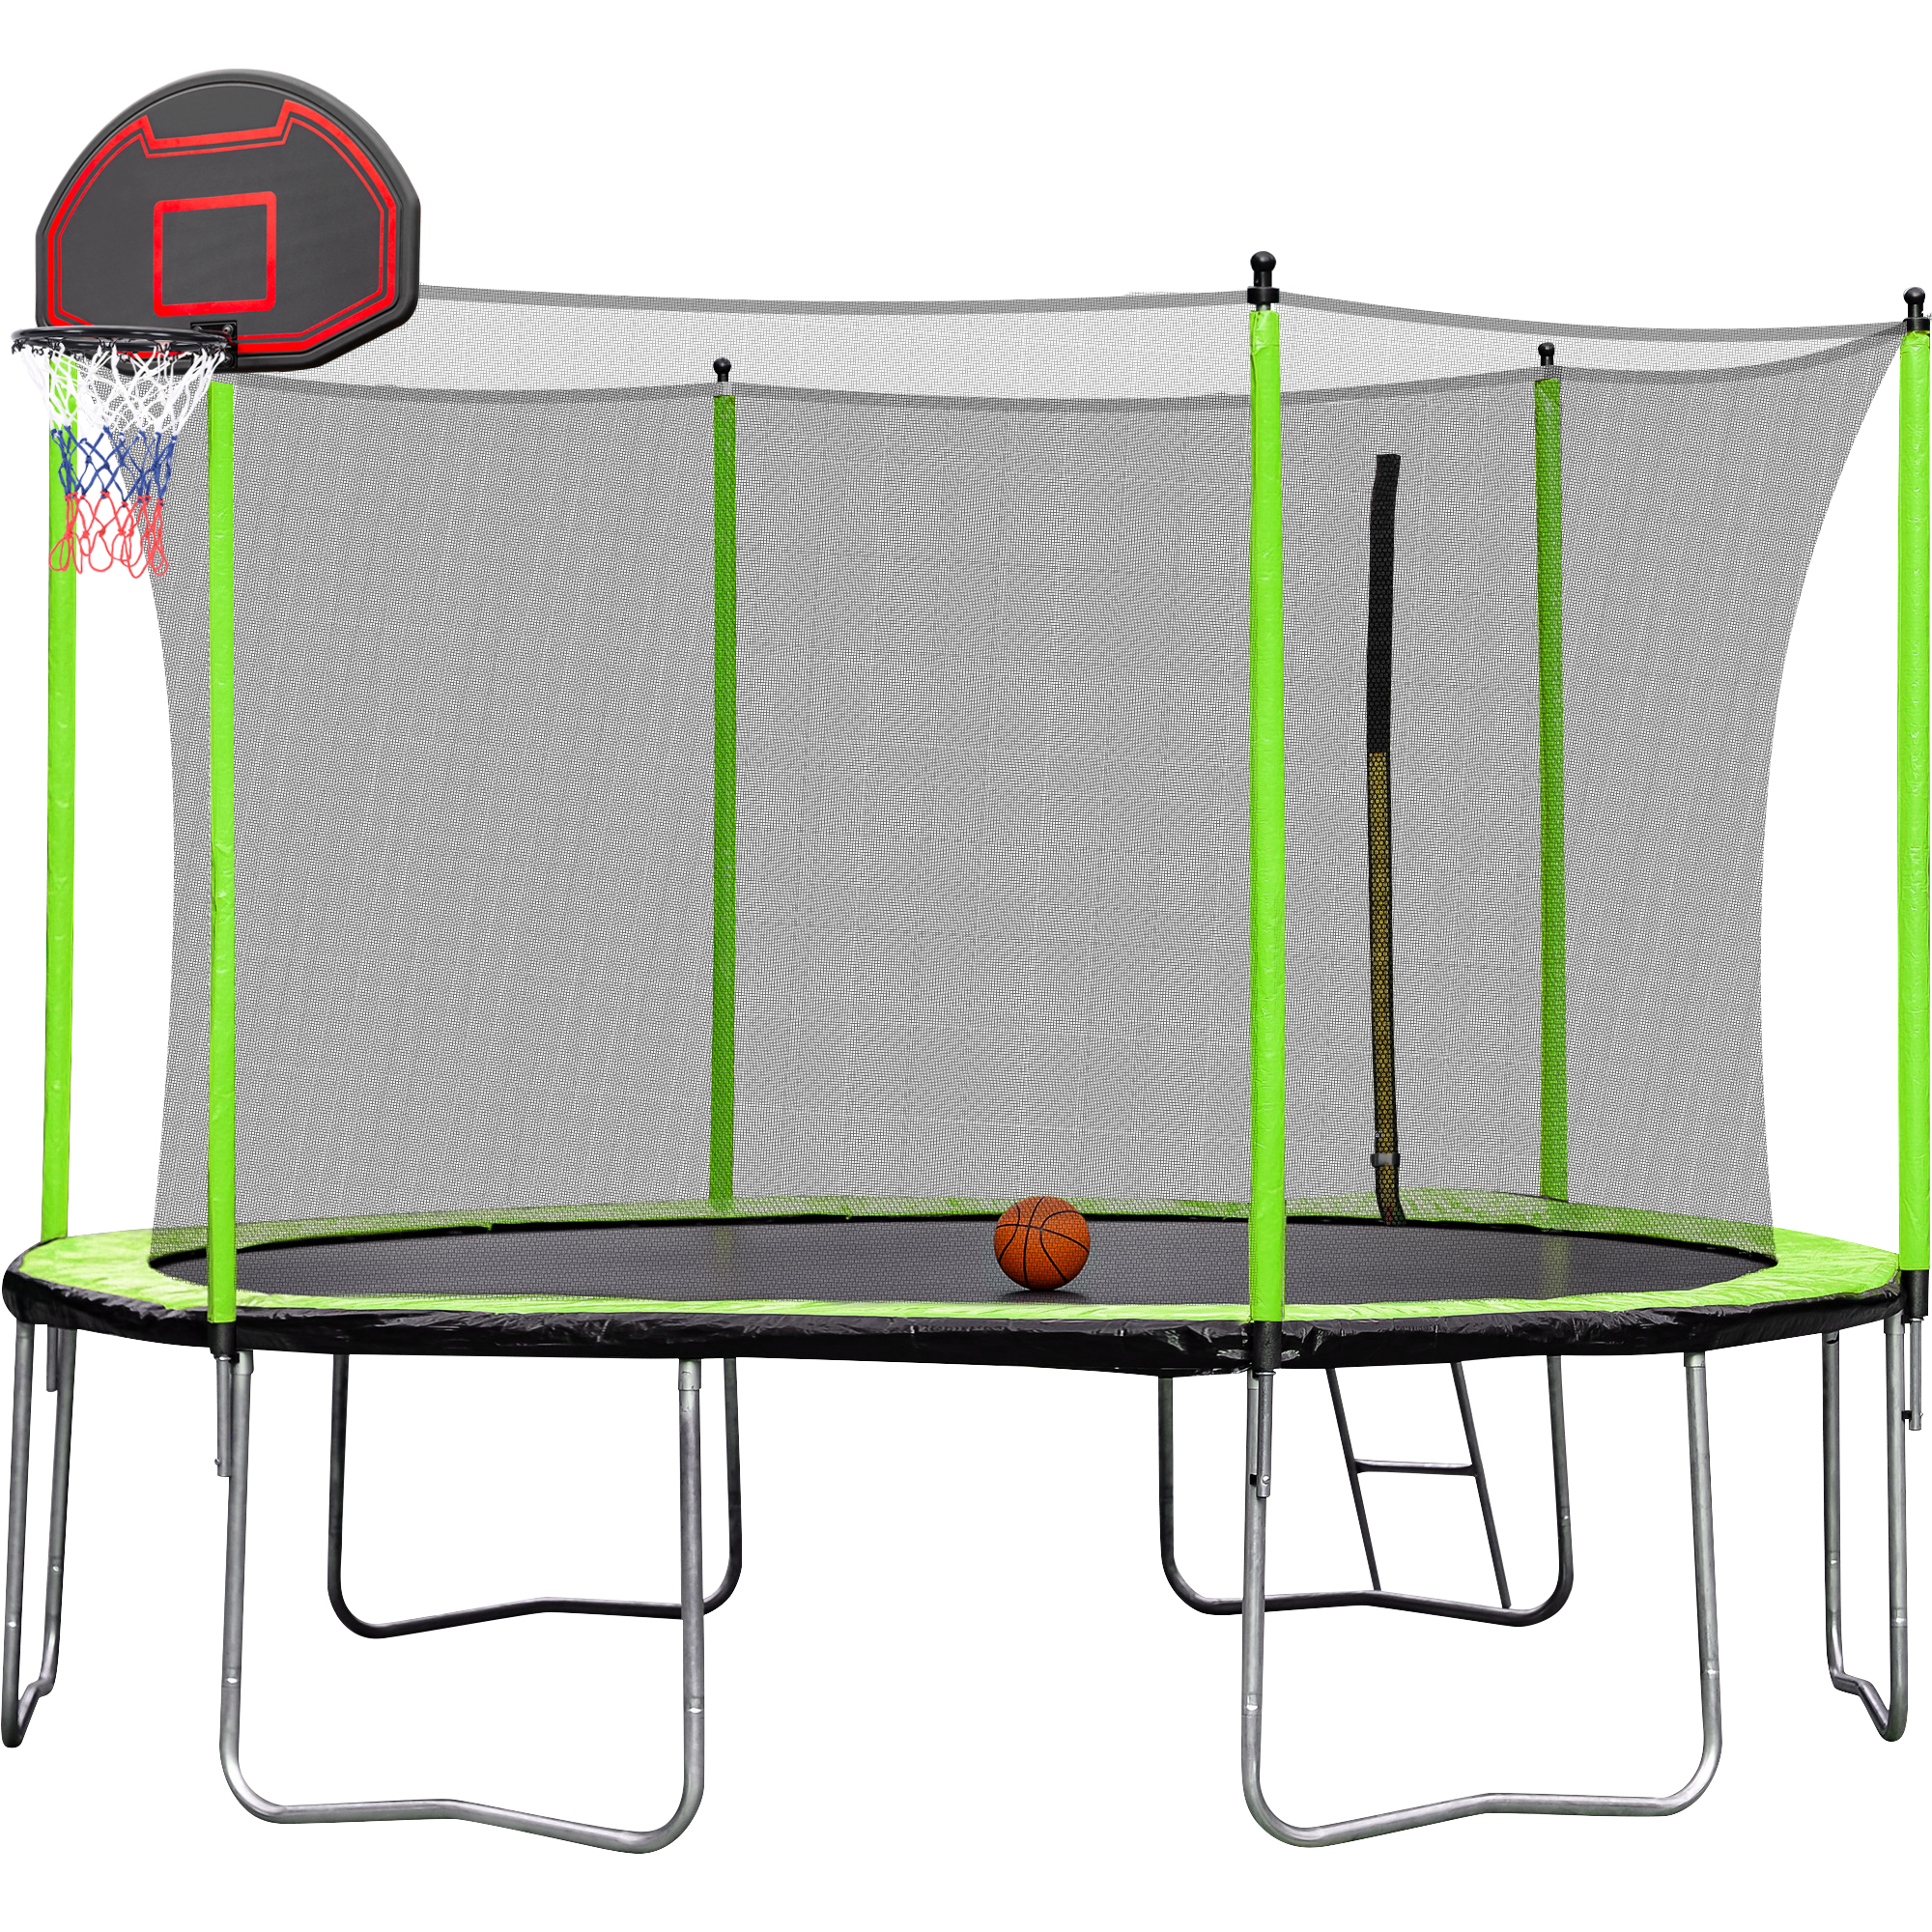 12FT Trampoline with Basketball Hoop Inflator and Ladder(Inner Safety Enclosure) Green-Boyel Living